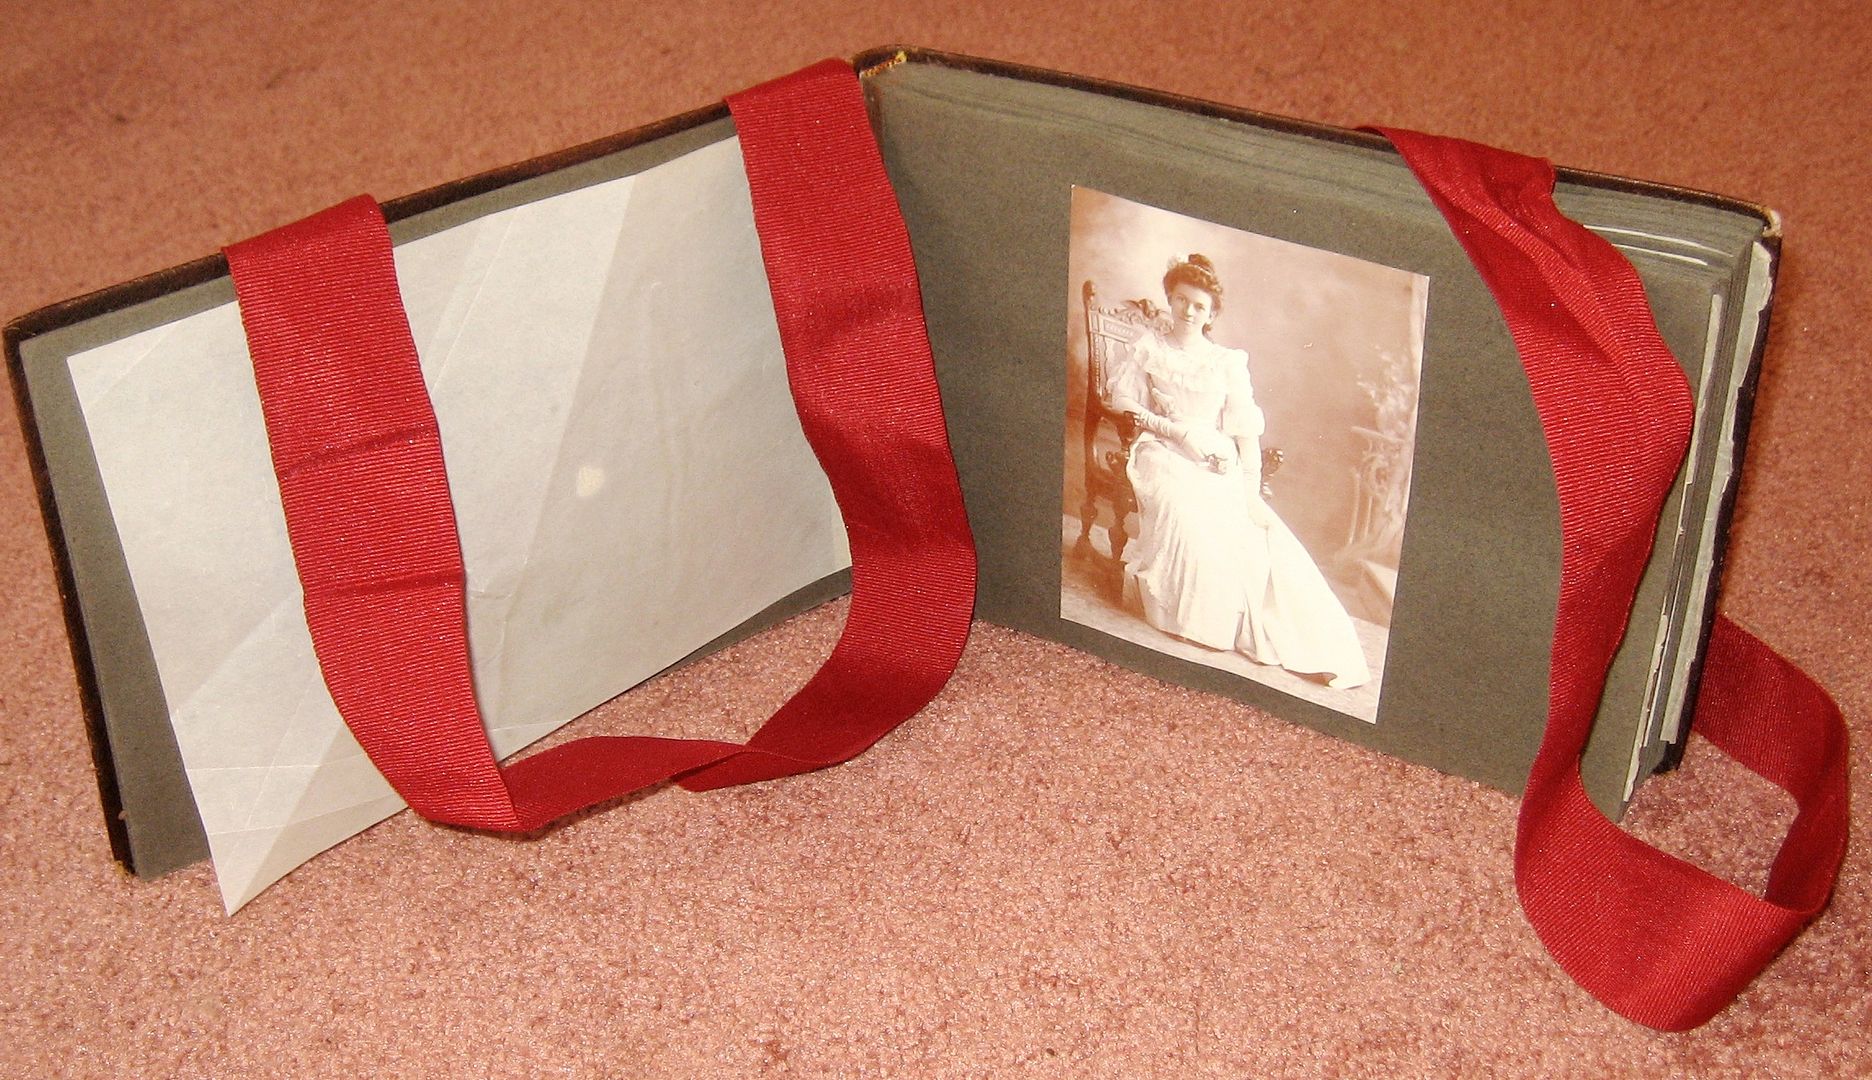 It was Christmas 1900 when Addie sent this photo album to her brother-in-law in Denver (my great-grandfather). 